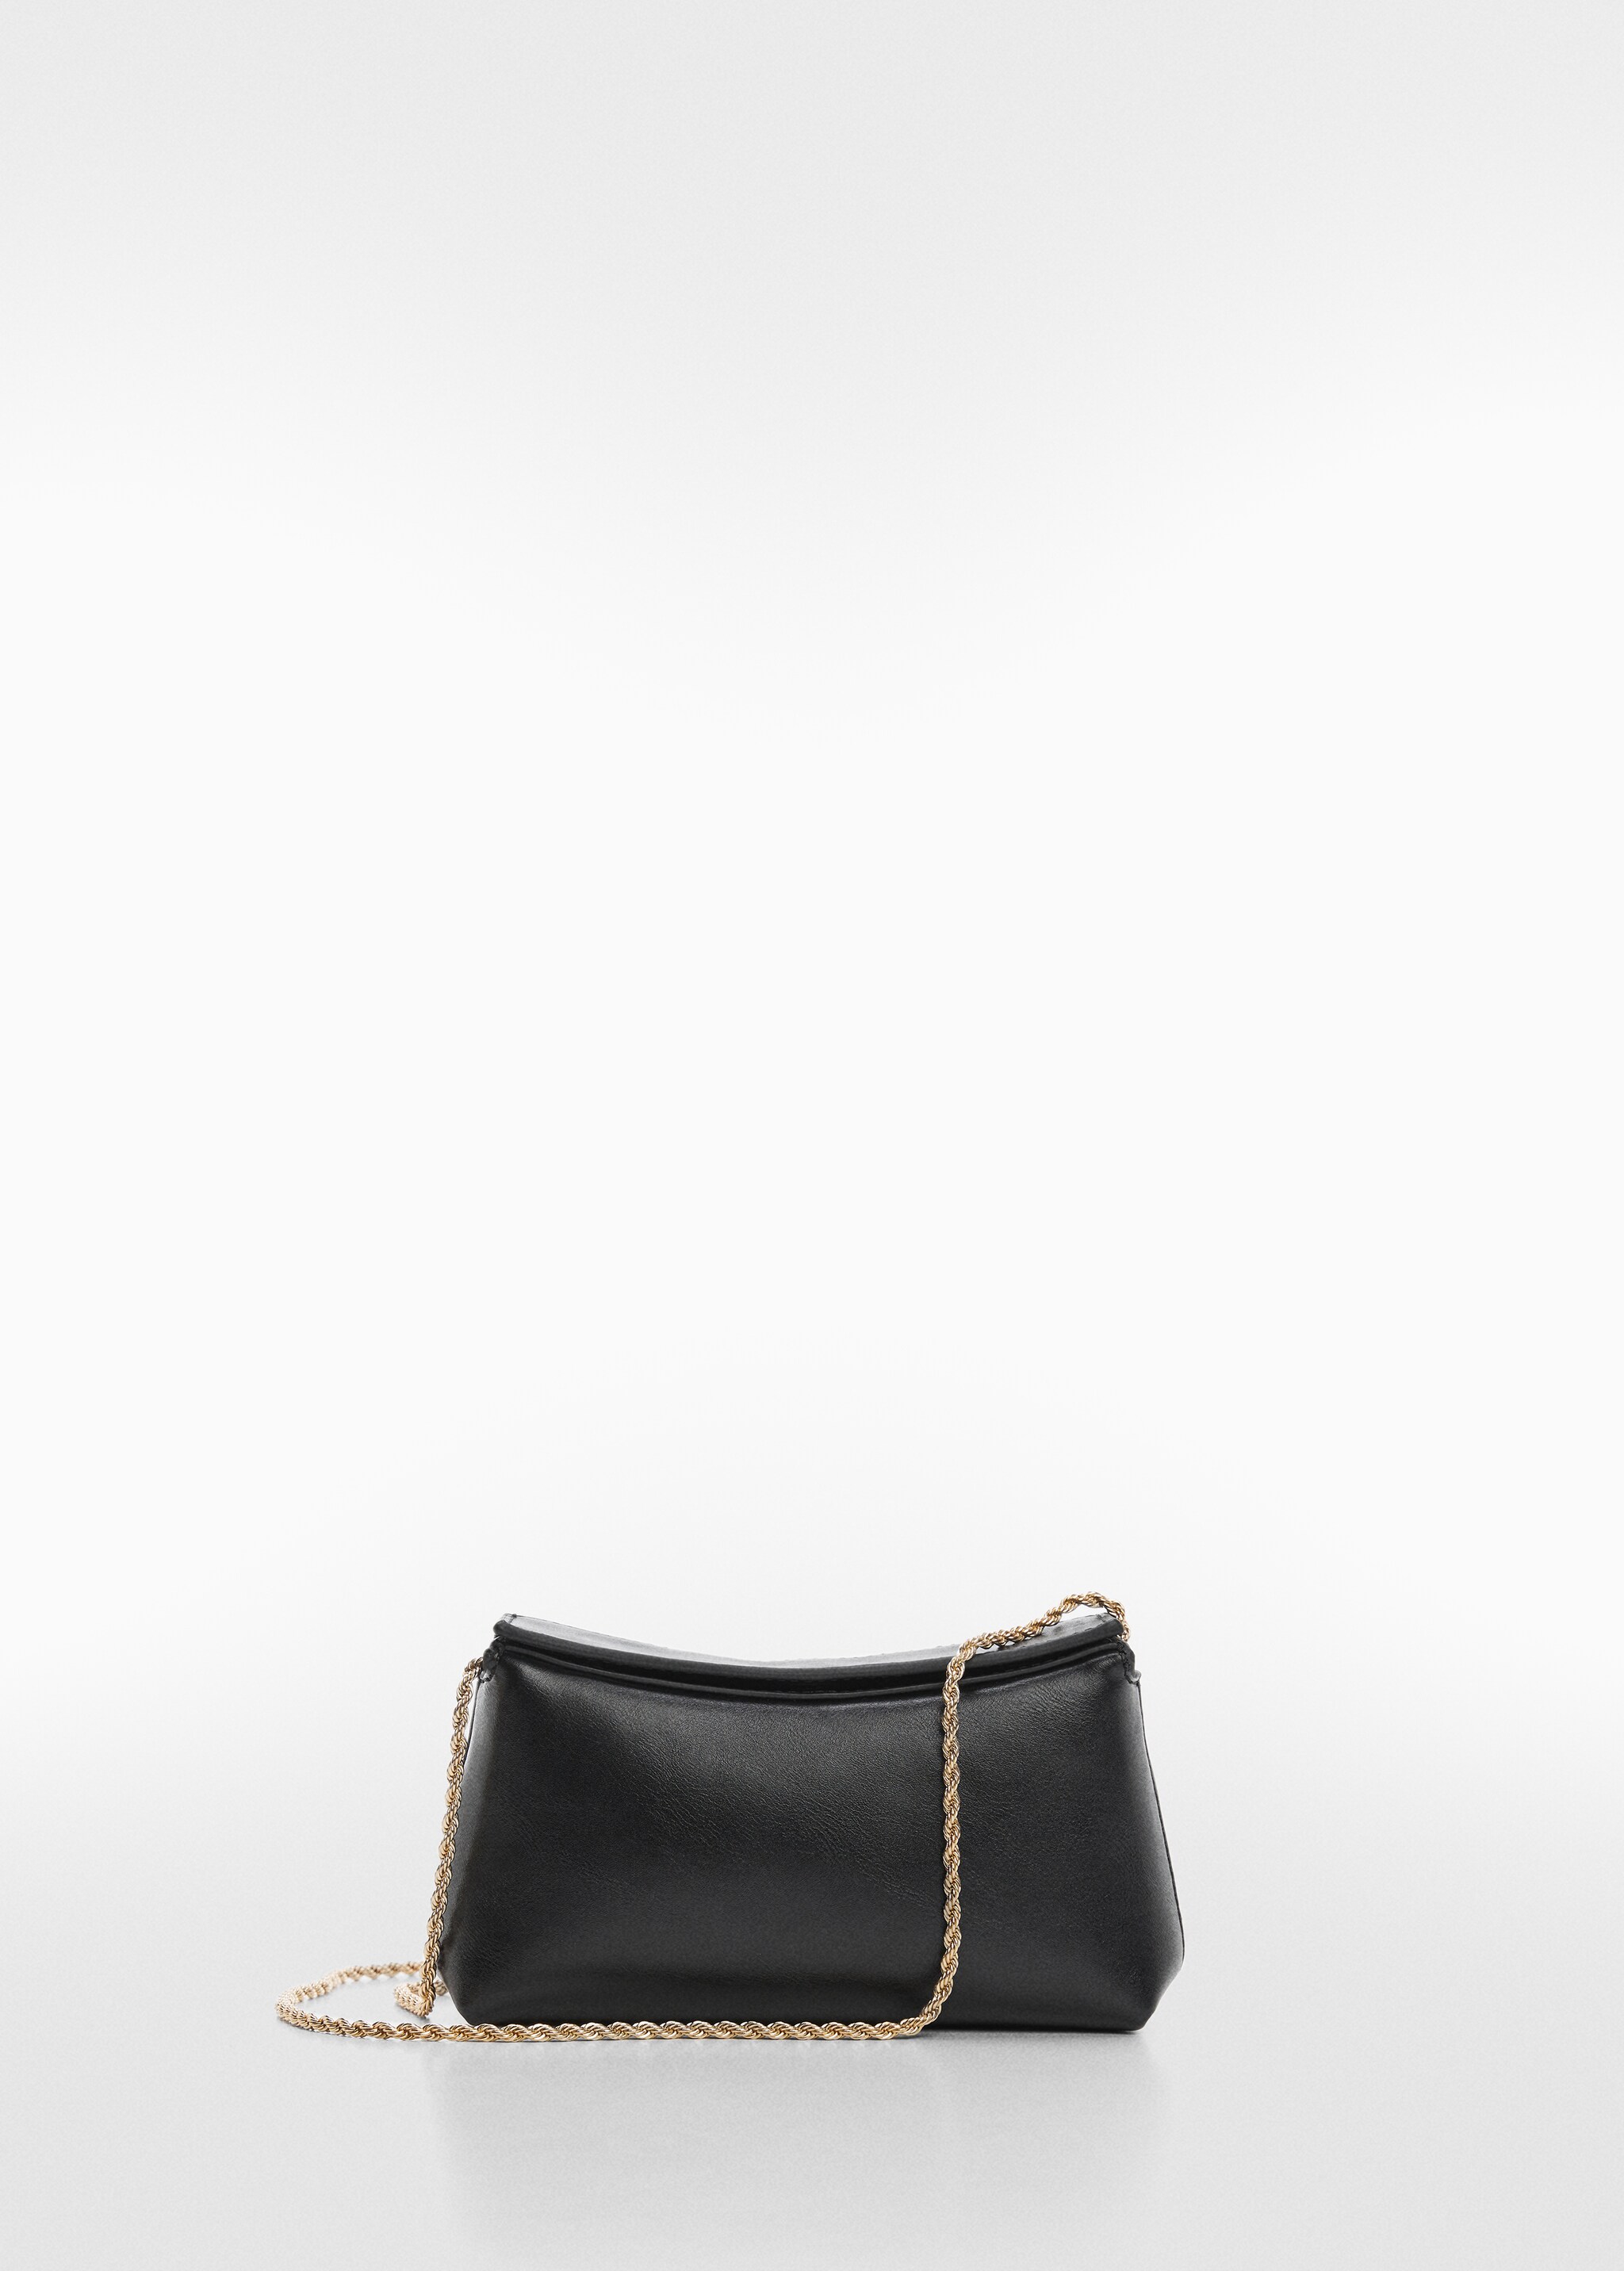 Chain shoulder bag - Article without model